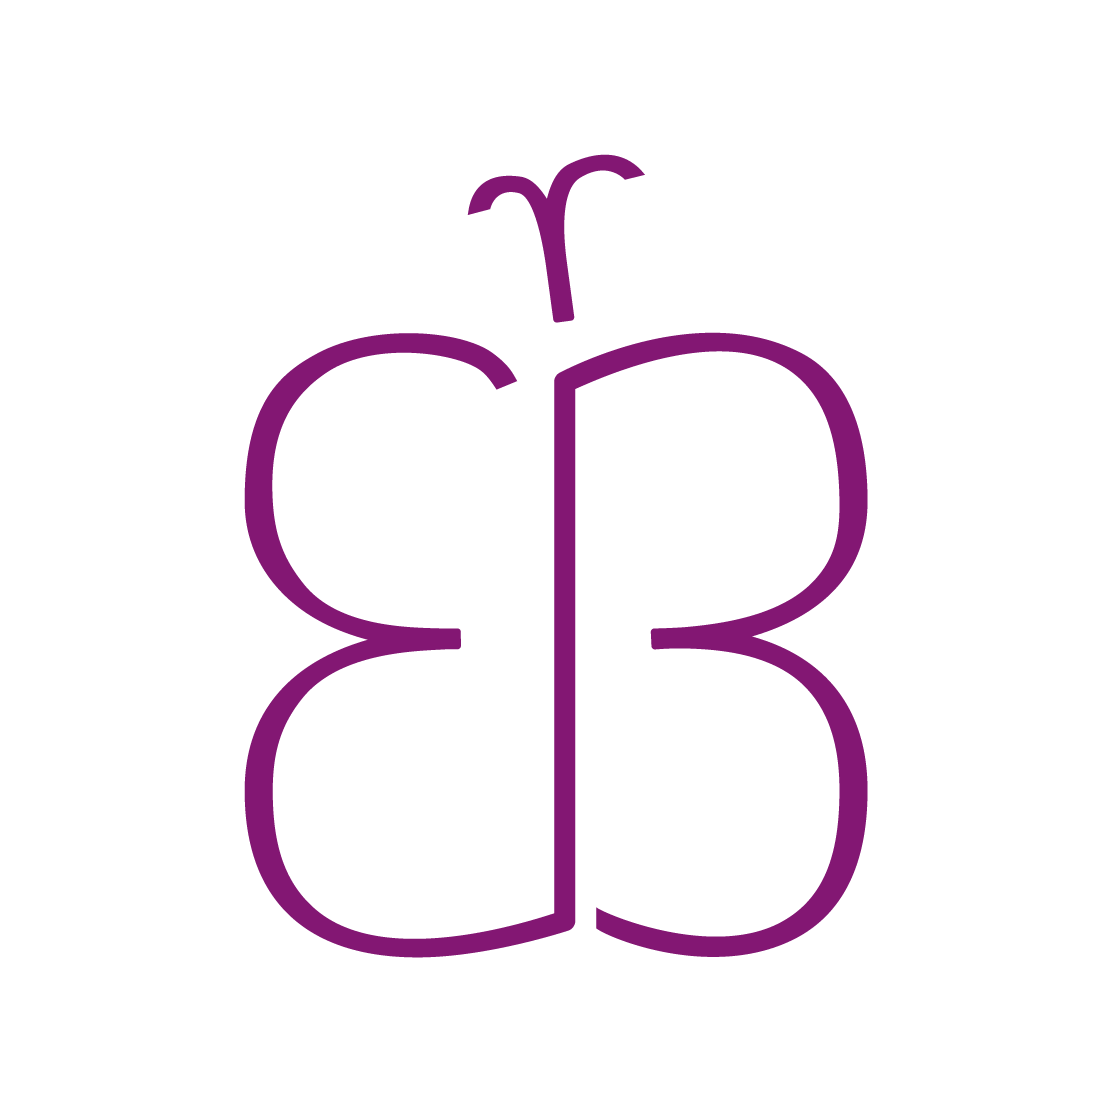 Eloise Baker's logo, the letters EB making the shape of a butterfly